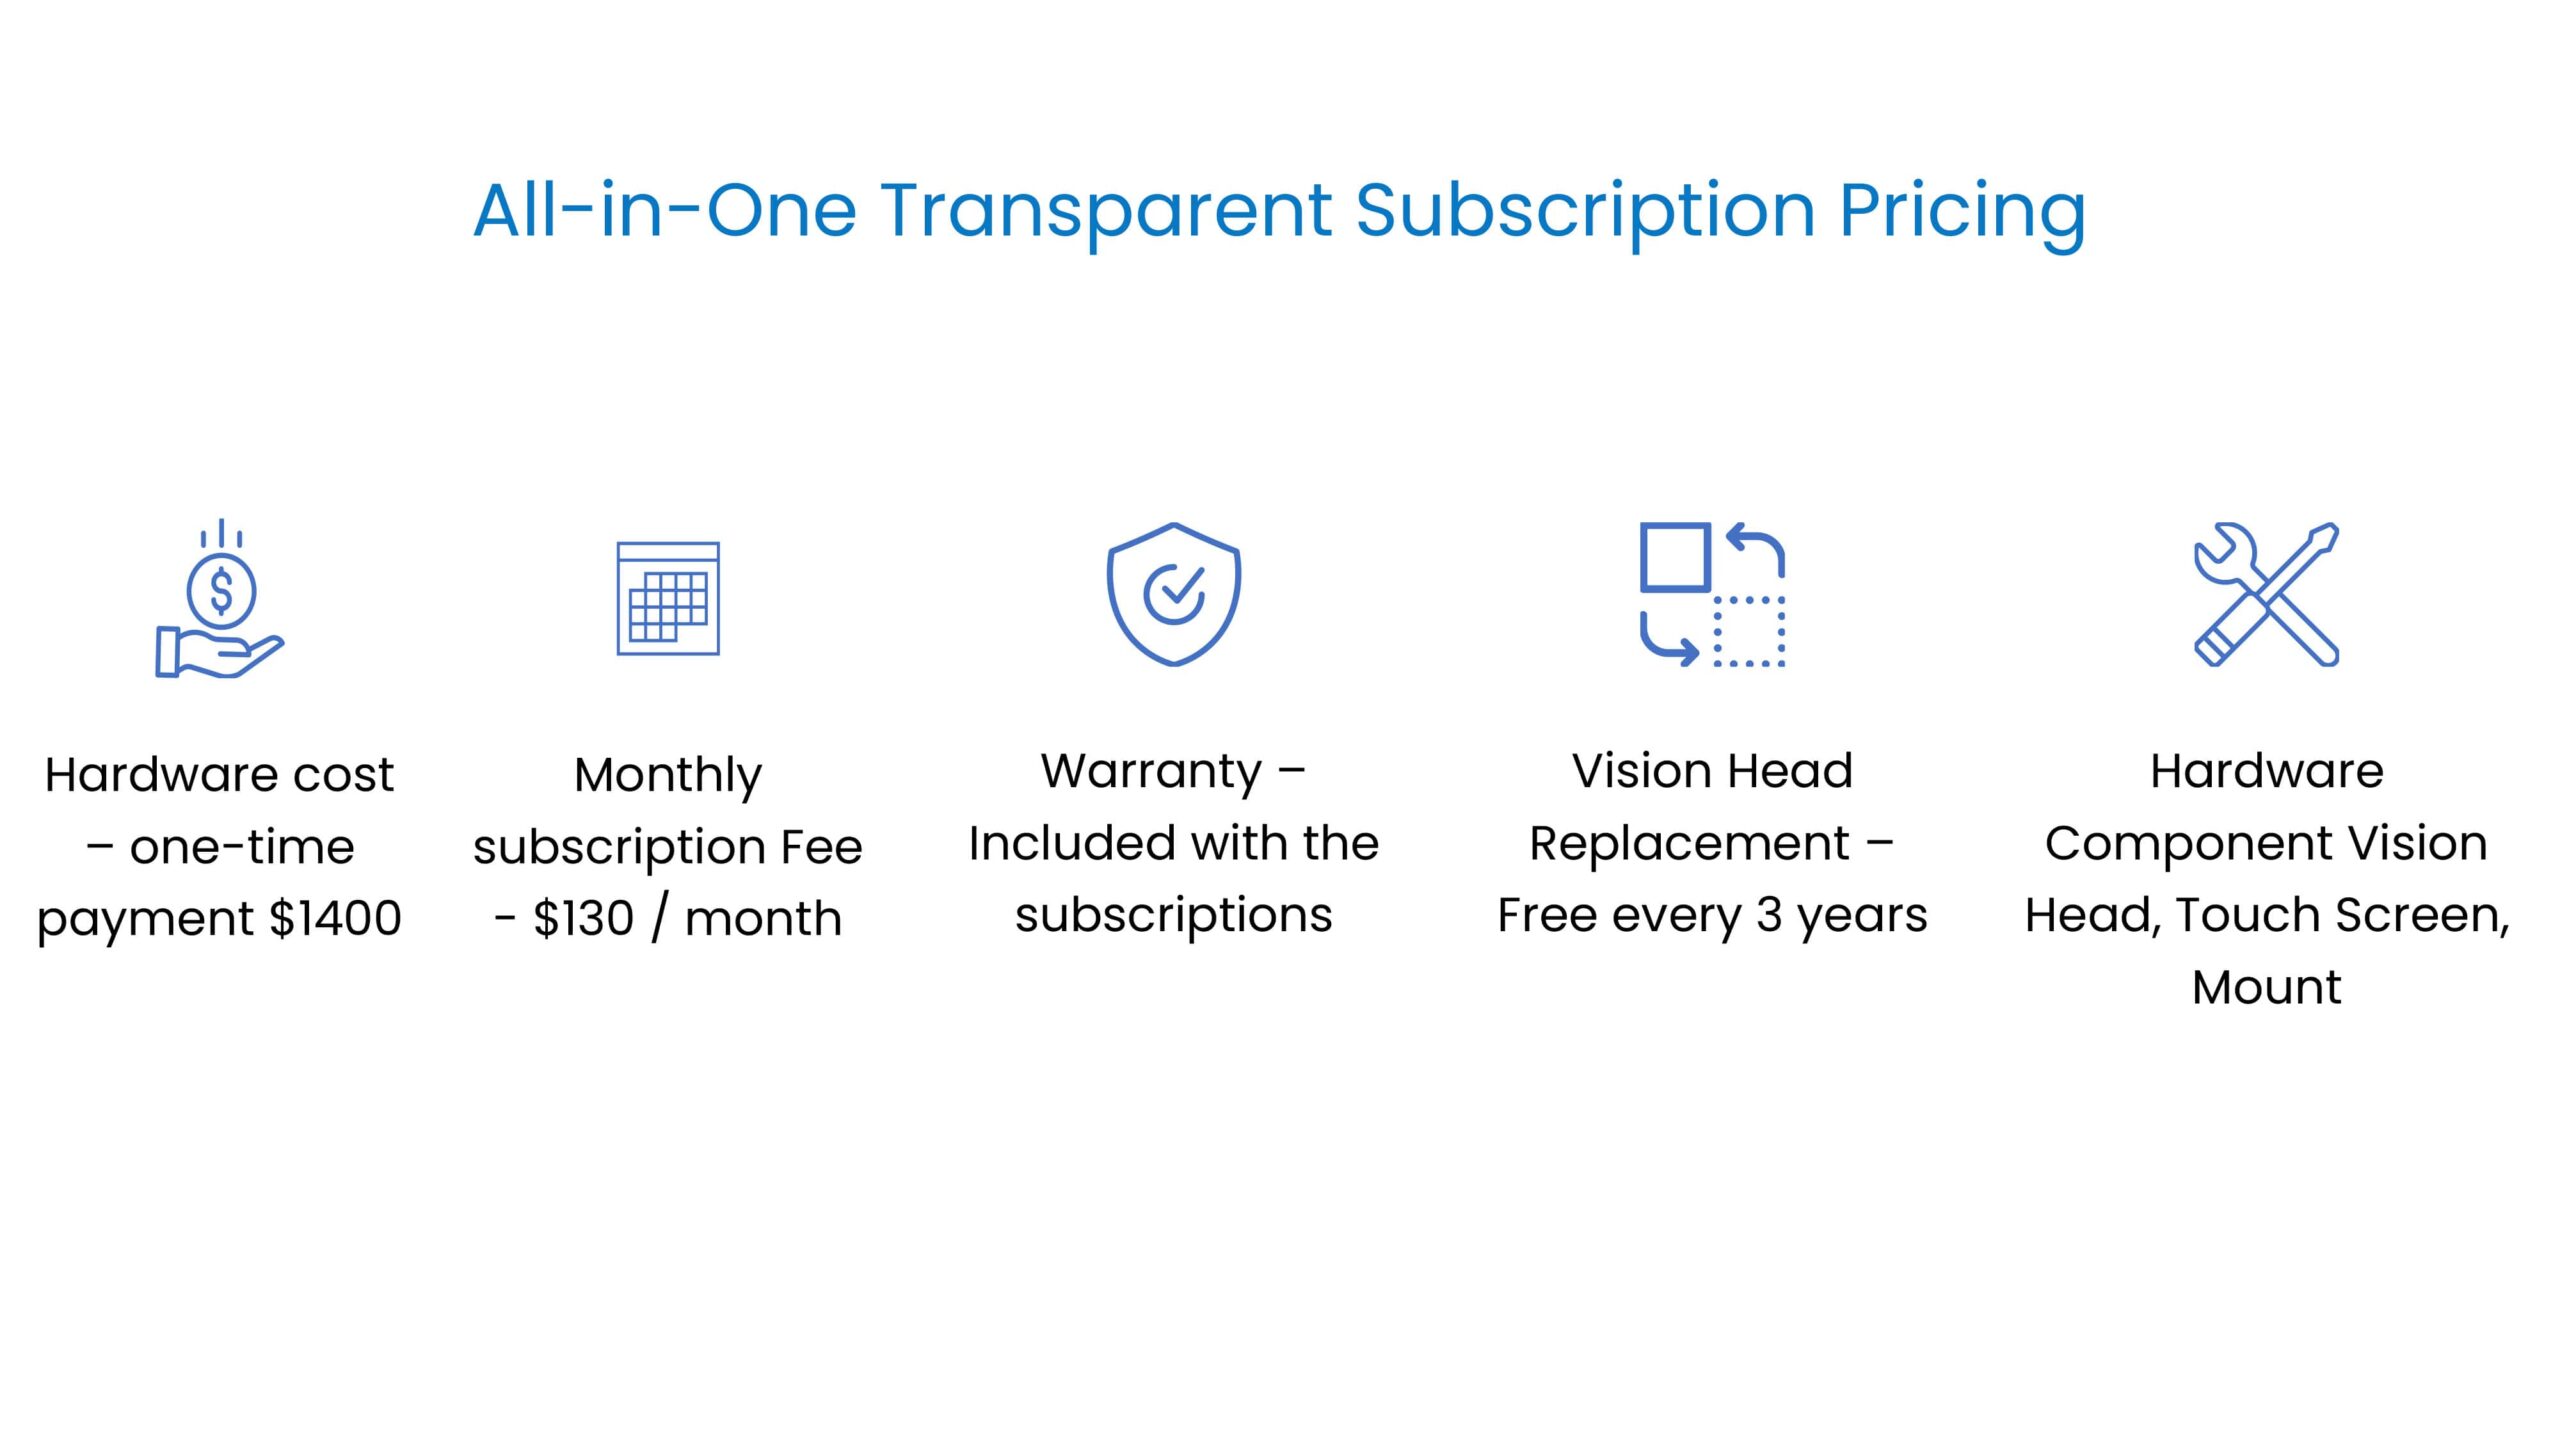 a clear breakdown of All-in-One Transparent Subscription Pricing